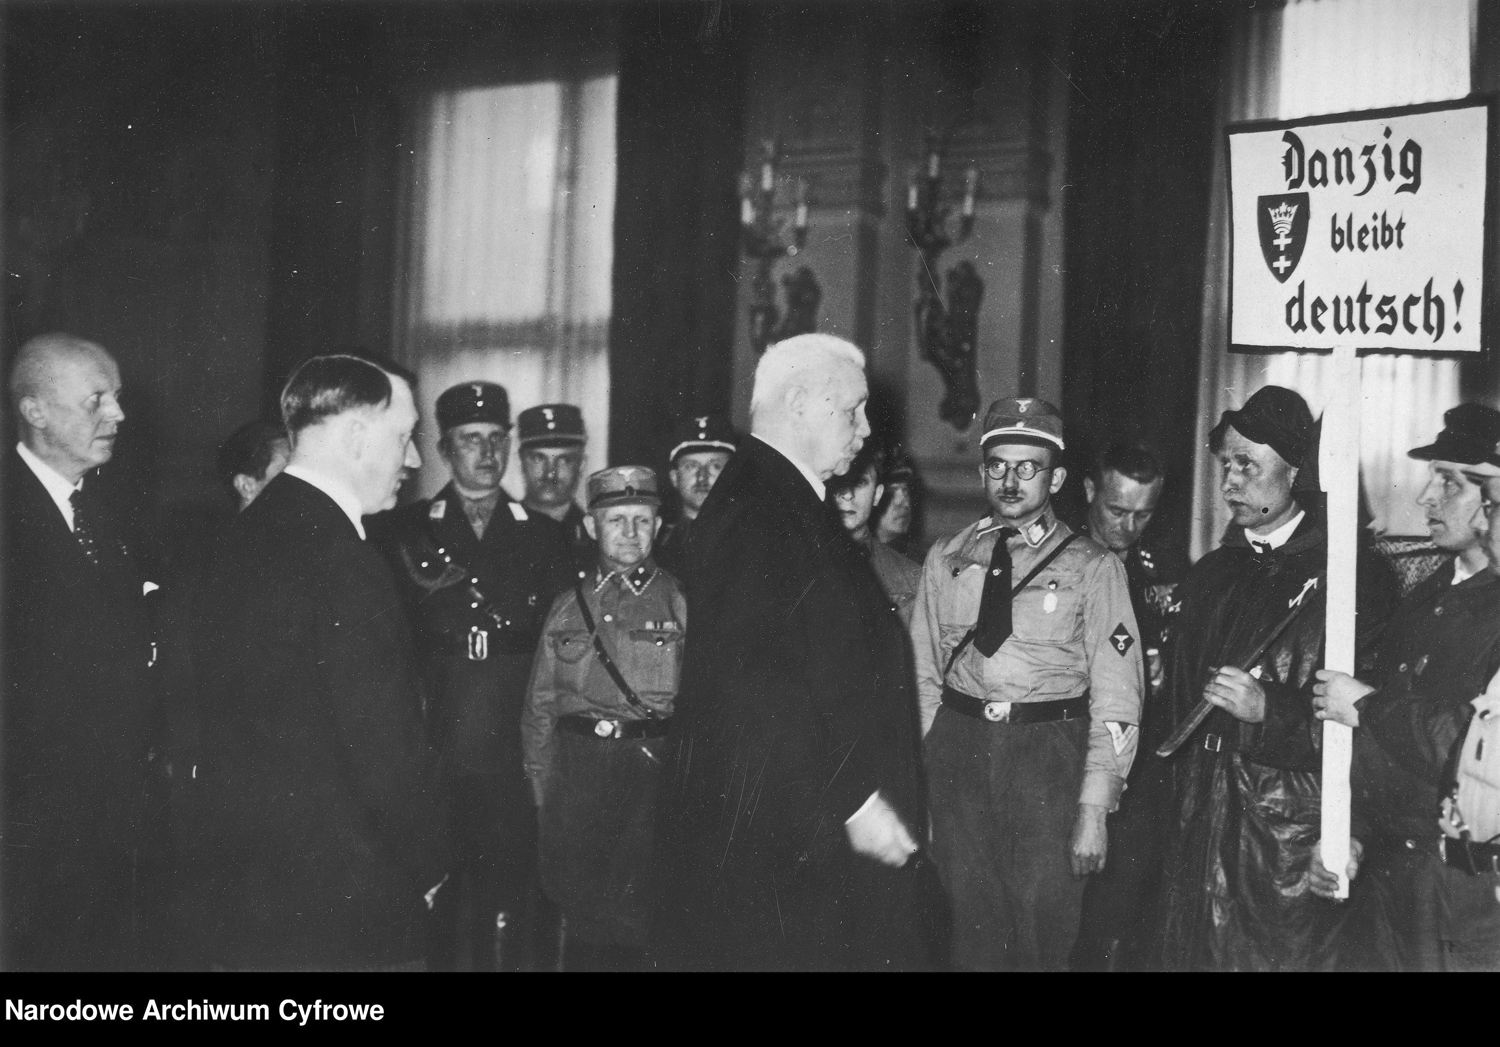 President Paul von Hindenburg with Reich Chancellor Adolf Hitler and Secretary of State Hans Lammers welcome the delegation from the Free City of Gdańsk